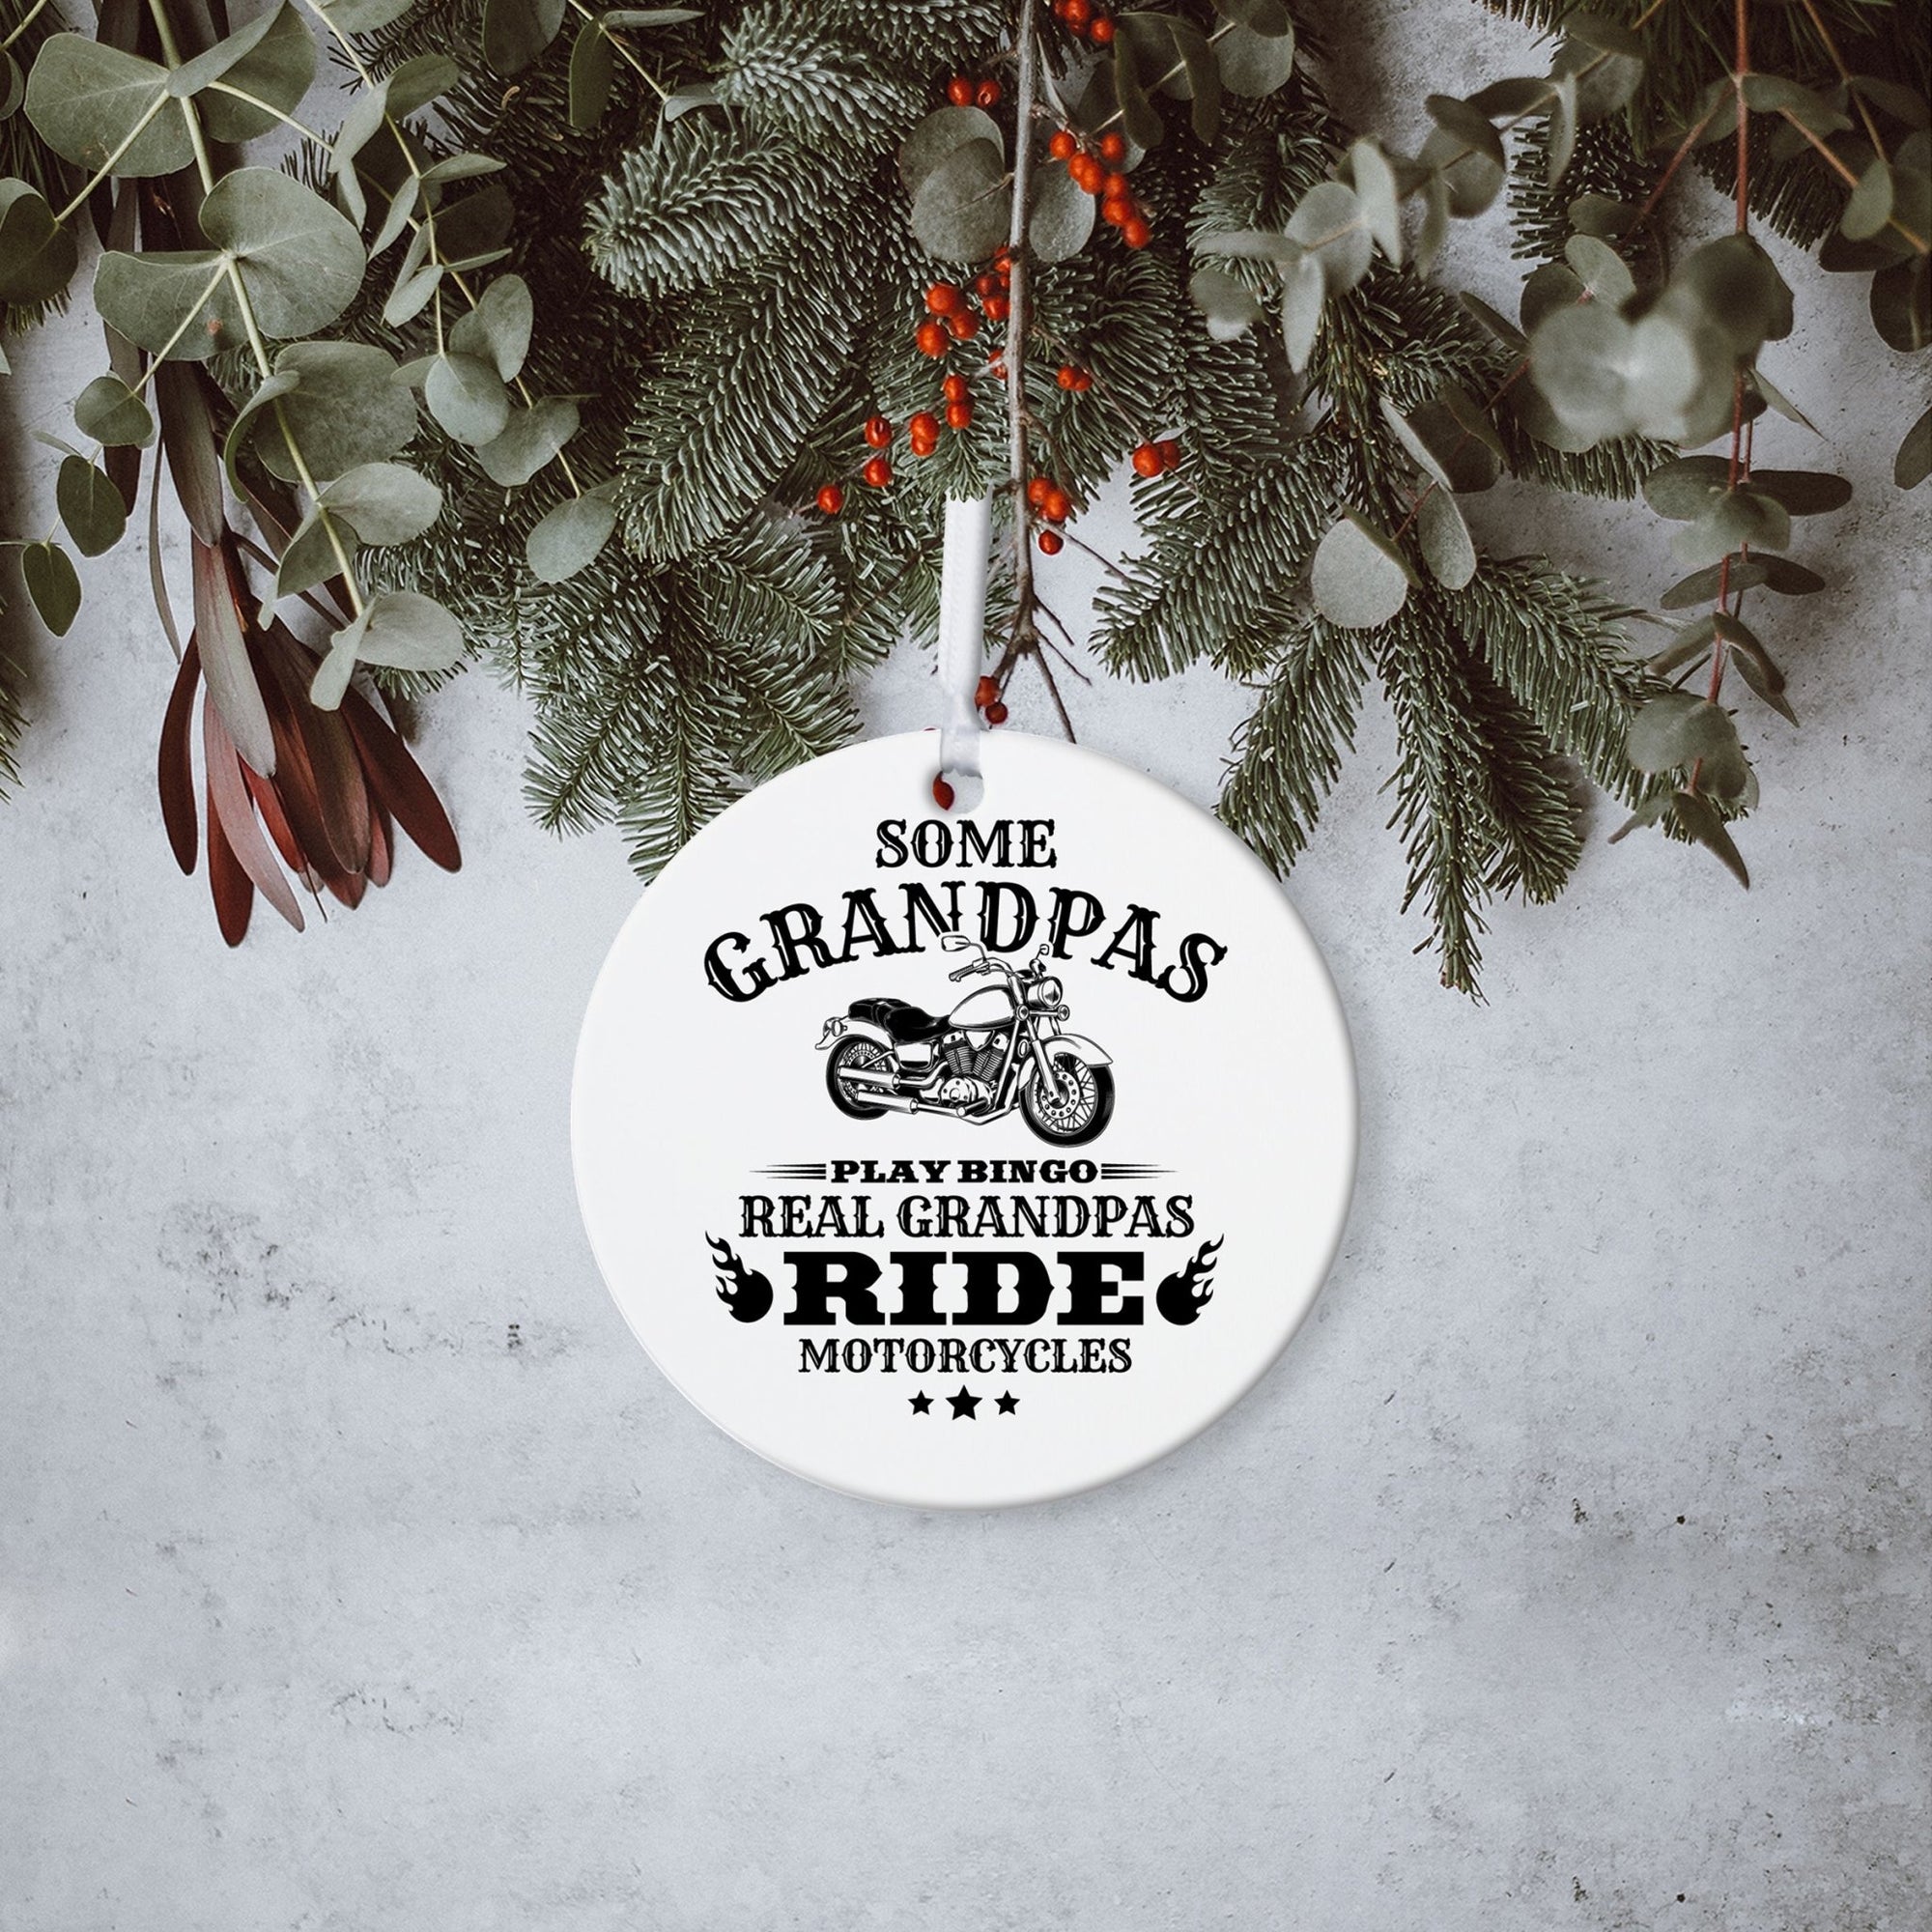 Grandparents’ White Ornament With Inspirational Message Gift Ideas - Some Grandpas Play Bingo. Real Grandpa Ride Motorcycles - LifeSong Milestones